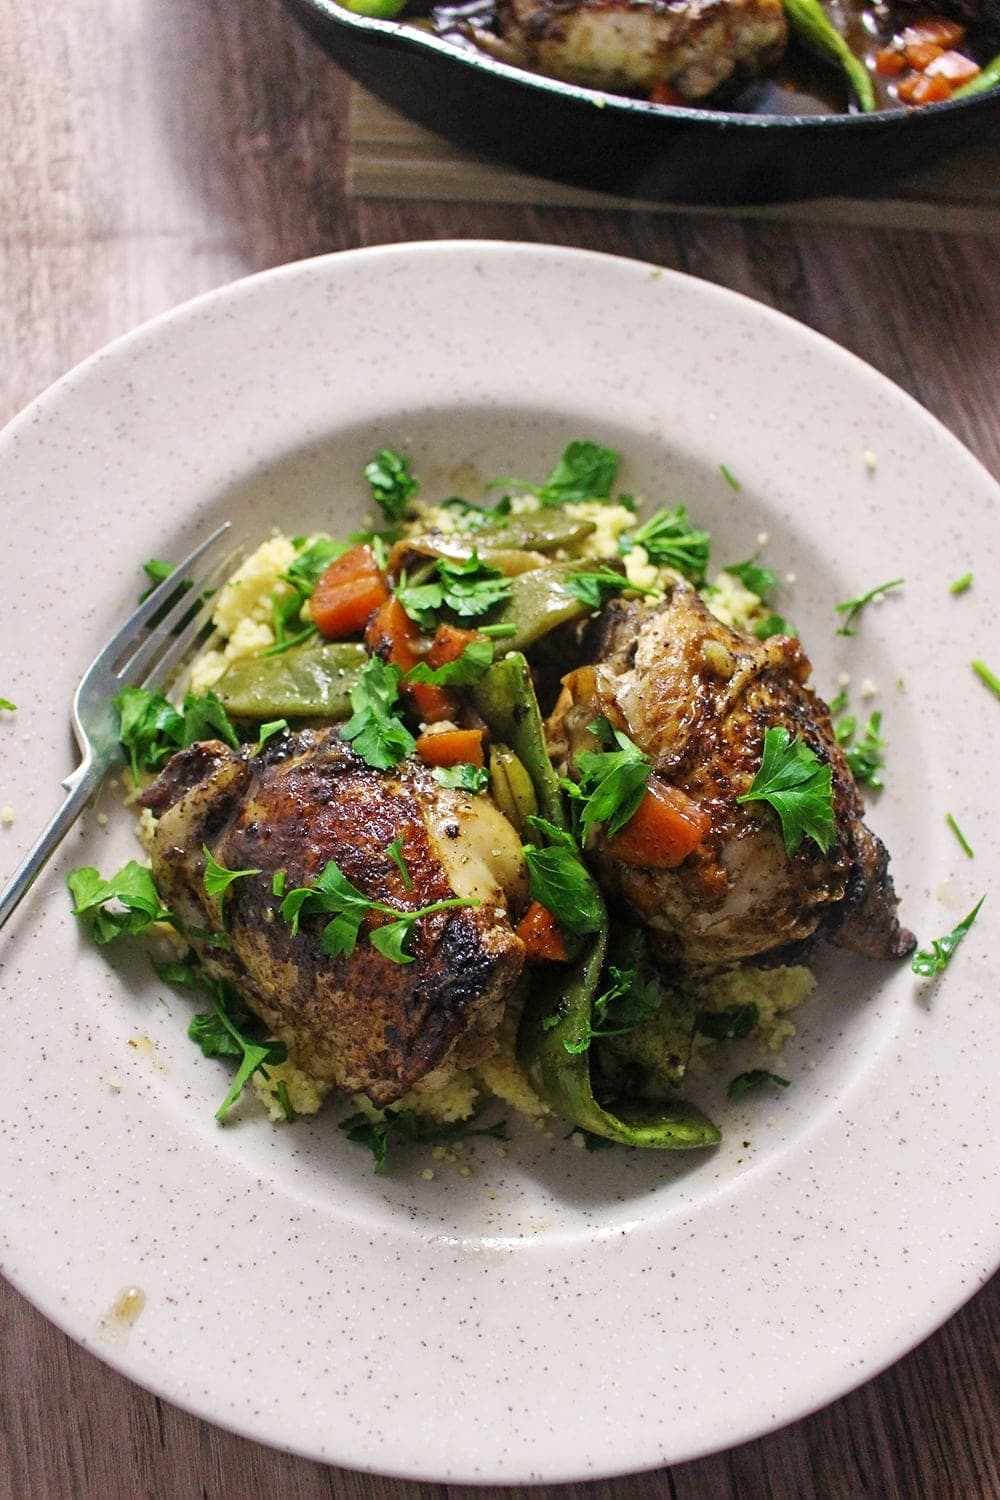 This berbere chicken recipe is bursting with flavour. It's quick and easy to put together and tastes amazing served over lime & parsley cous cous!